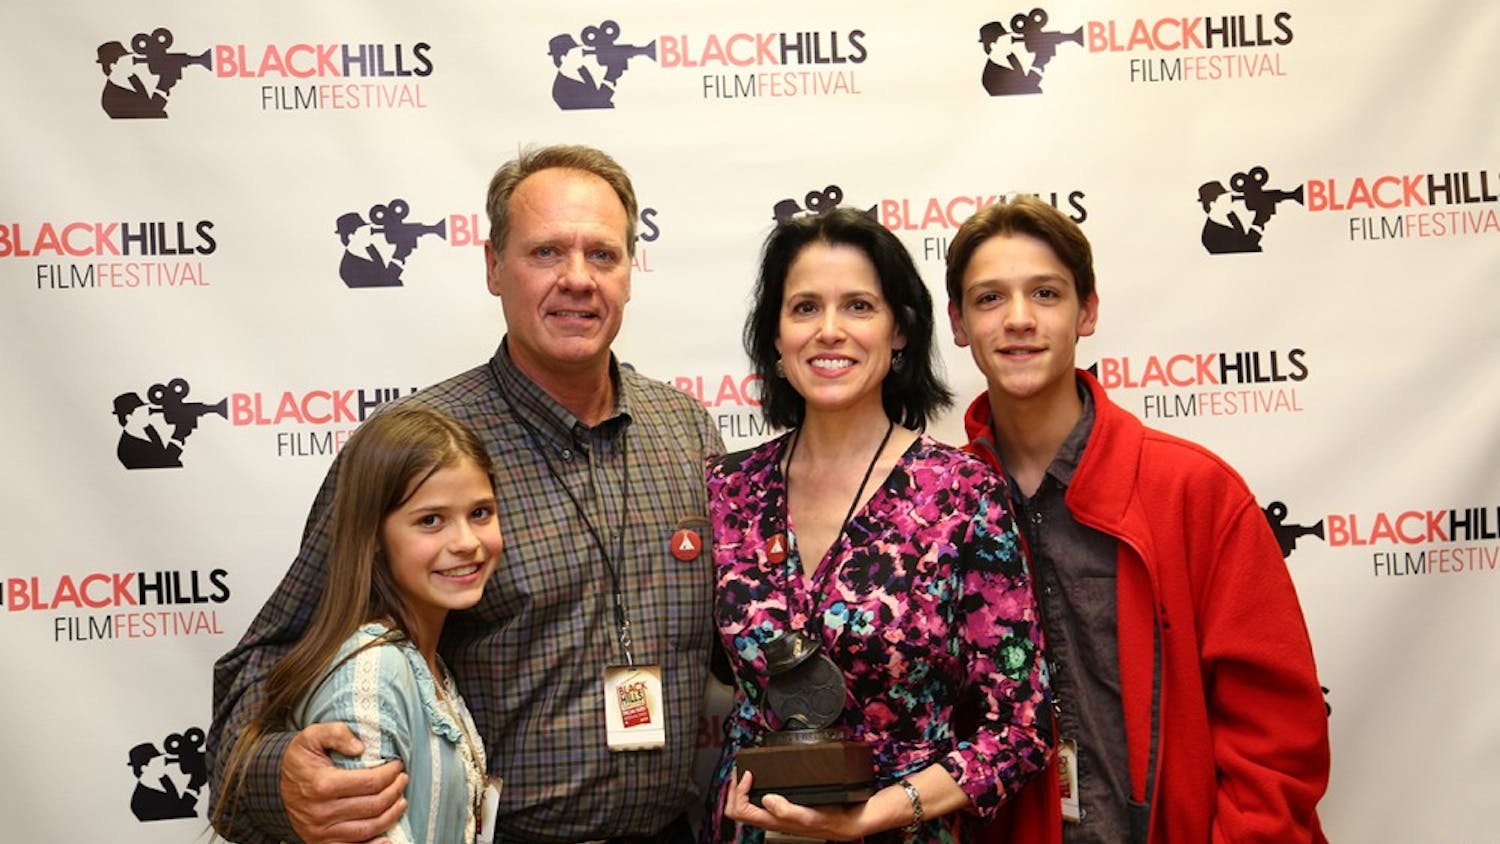 Molli Cameron, IU graduate and filmmaker behind the Indie feature film "Lakota Girls," which won the People's Choice Award at the Black Hills Film Festival in South Dakota. She is pictured with husband and co-producer Russell, and children Clara and Cavan. Clara was a co-lead in the film.&nbsp;